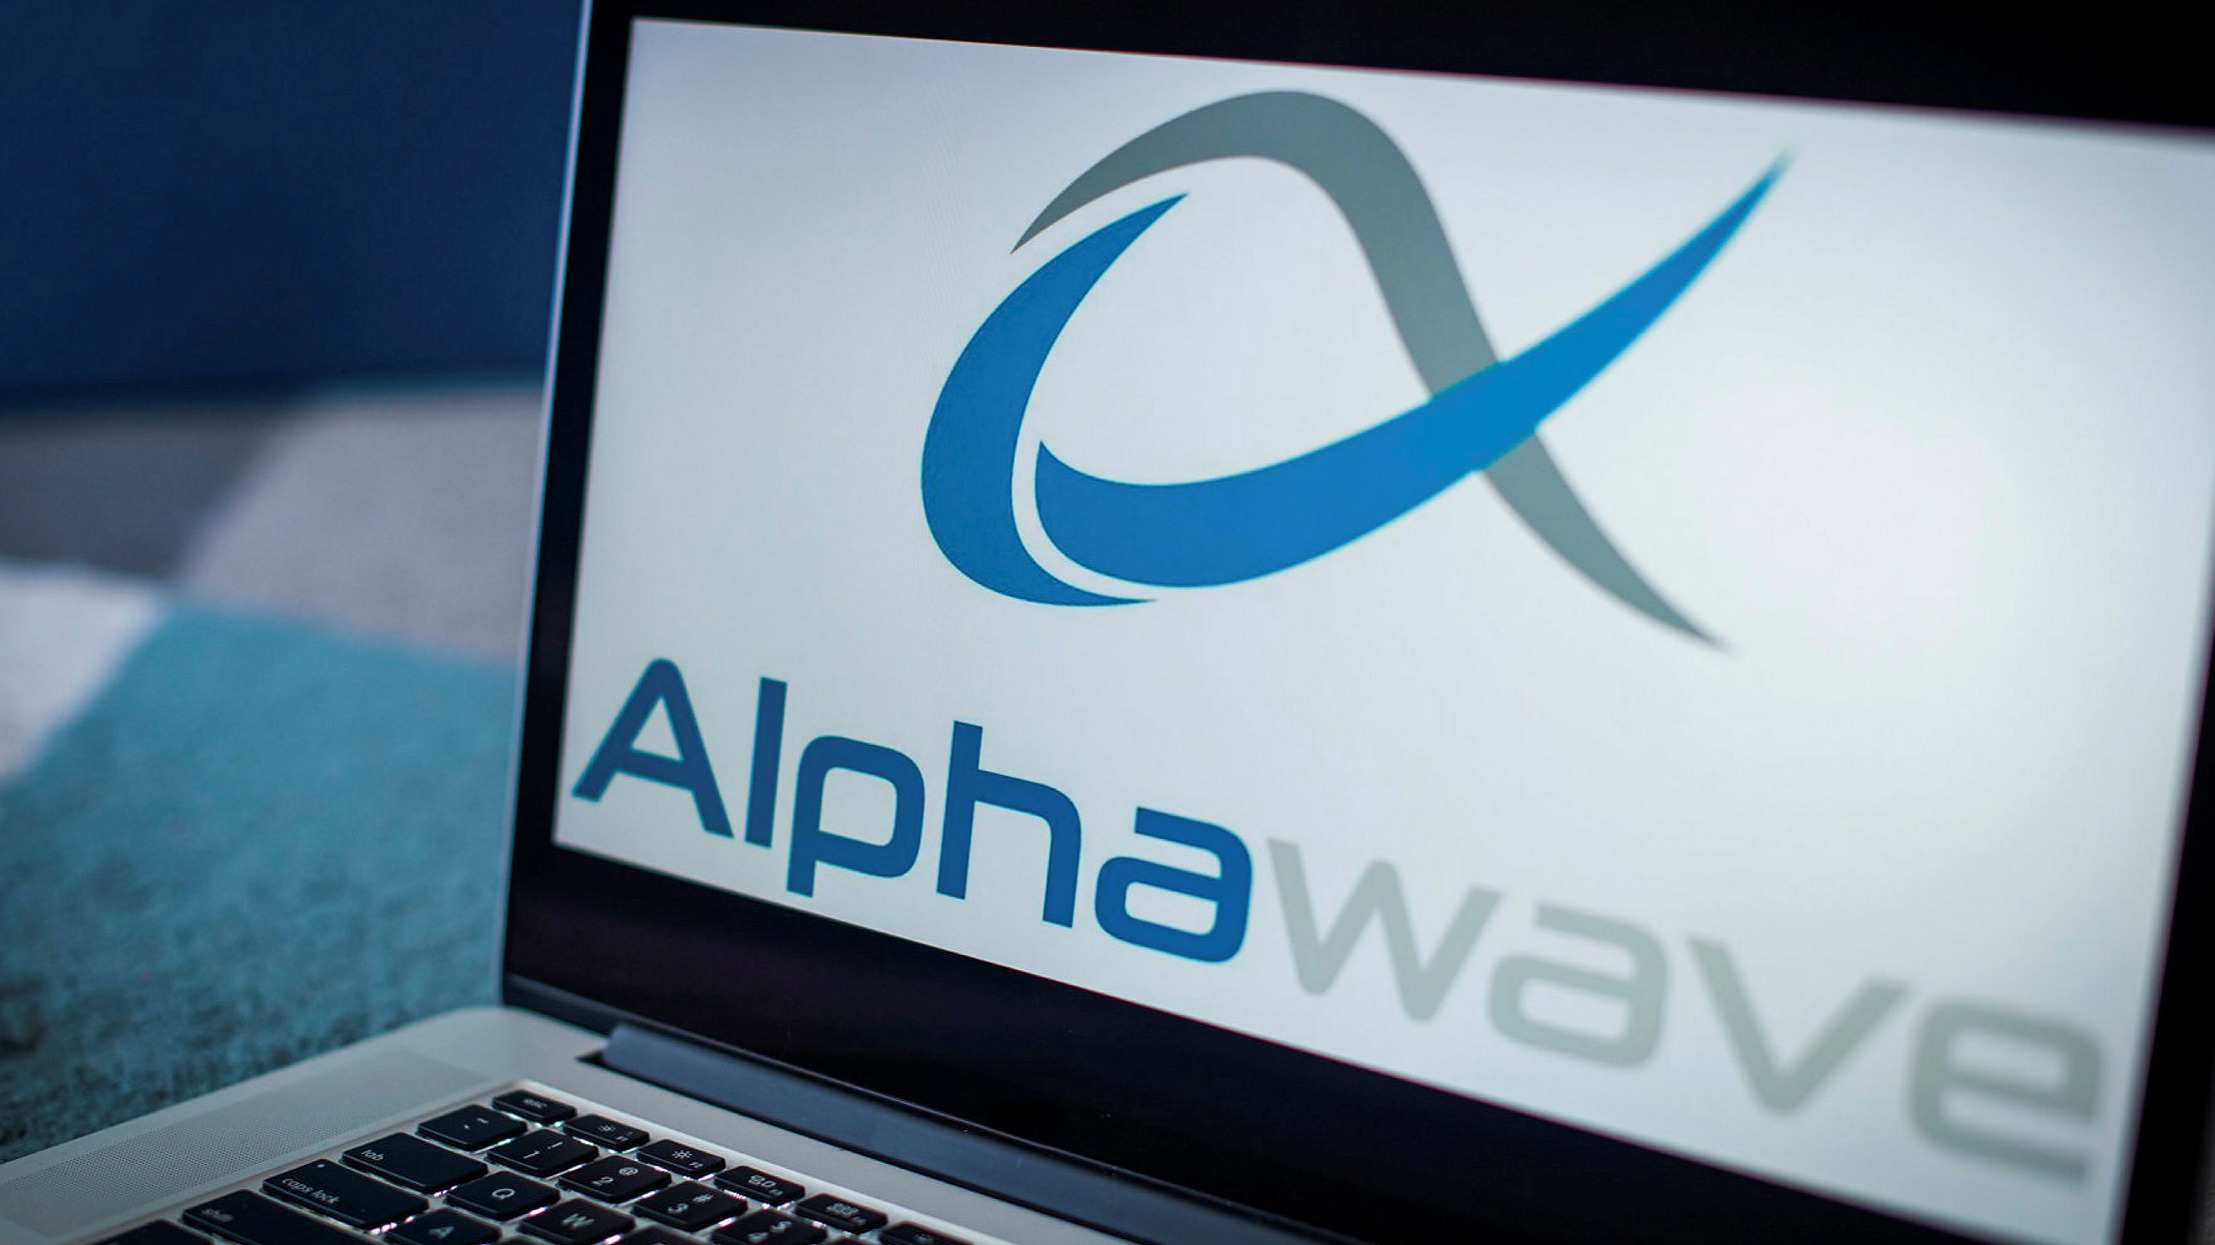 Alphawave shares price forex demystified meaning